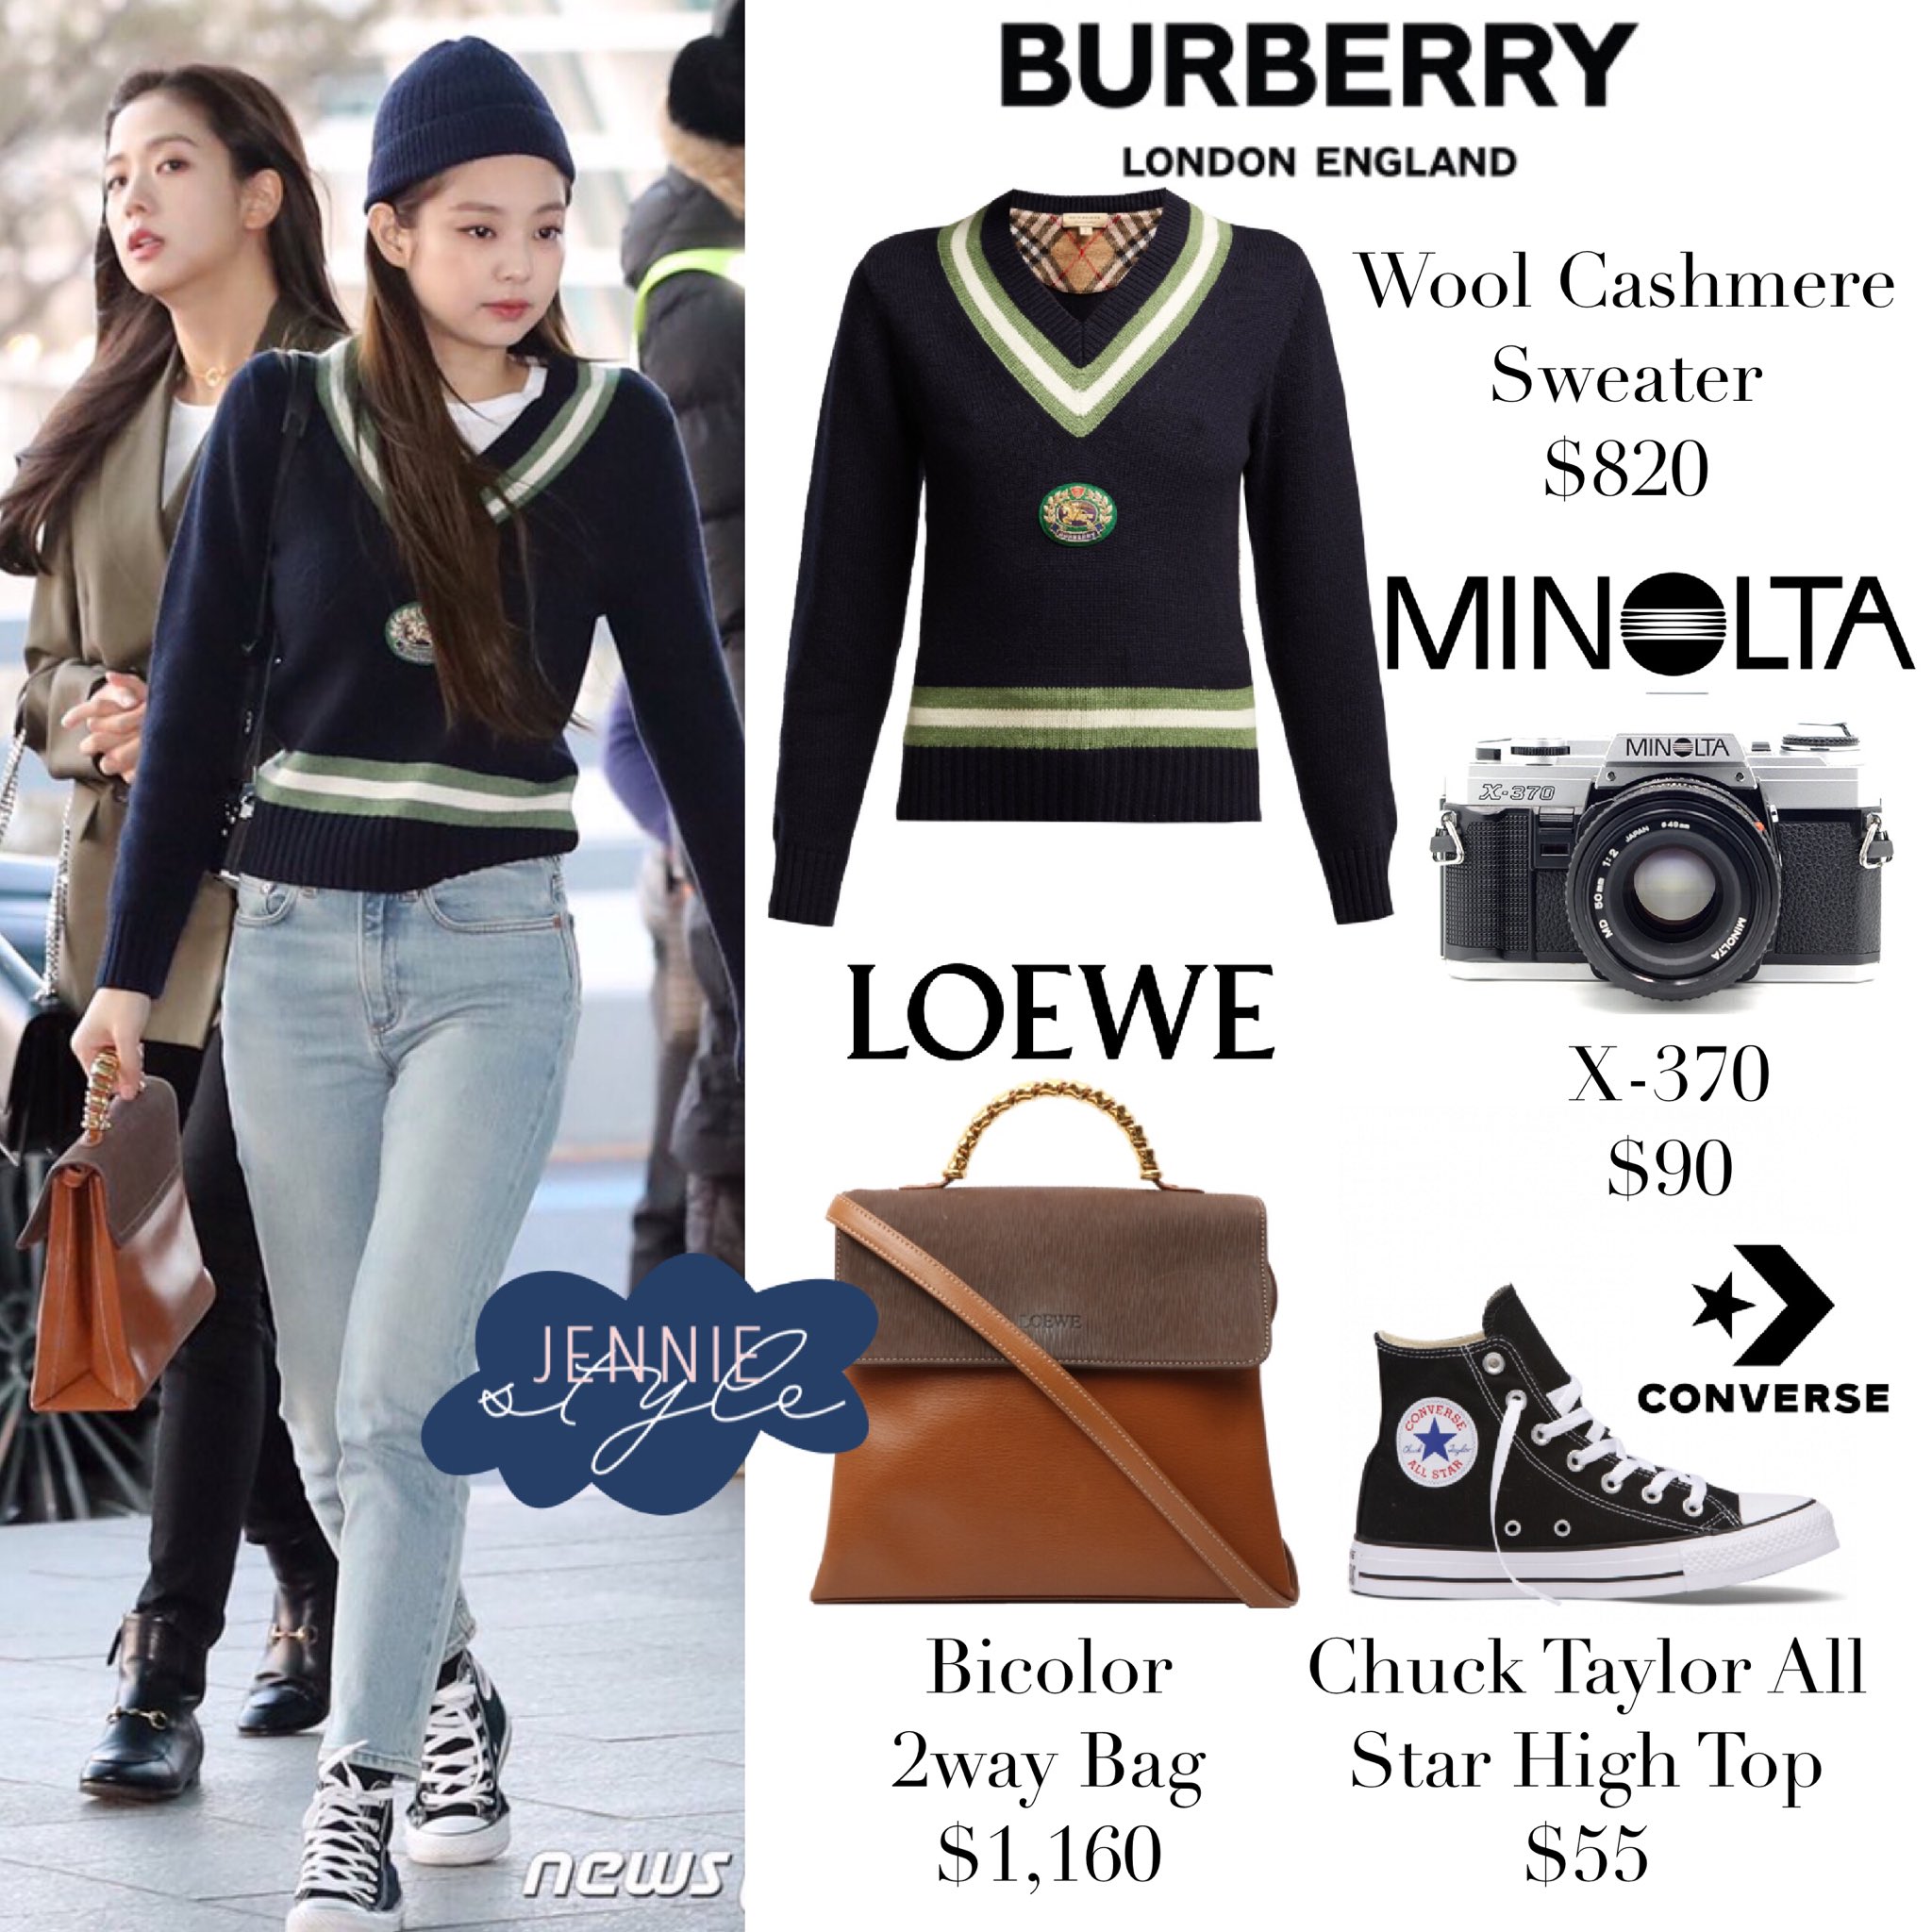 Jennie Style в X: „Incheon Airport 190711 CHANEL Vintage Top $590 (in  pink), Wallet on Chain $1,220 & Dr.Martens 8053 Nappa $125 #jennie # jenniekim #blackpink⁠ #blackpinkfashion #blackpinkstyle #jenniefashion # jenniestyle  / X